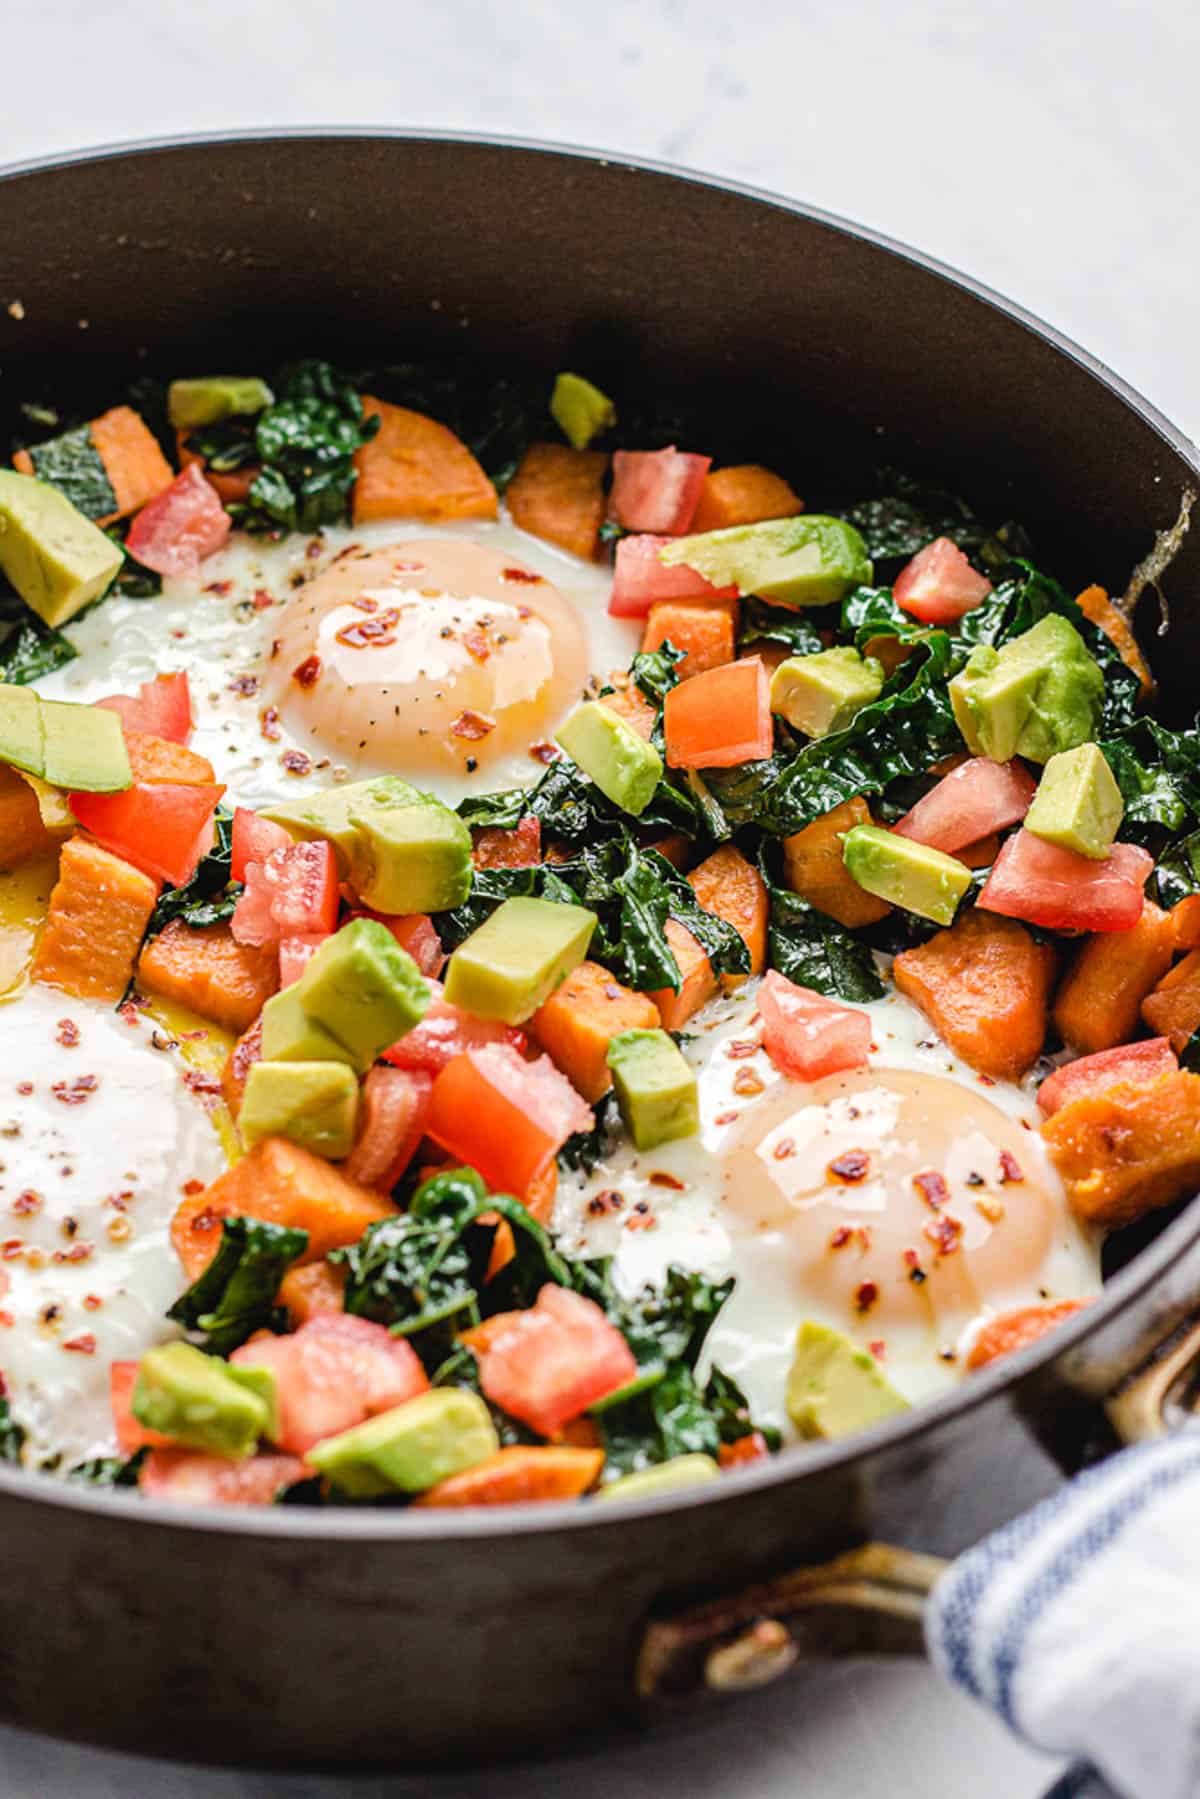 Breakfast hash in a skillet with veggies and eggs.